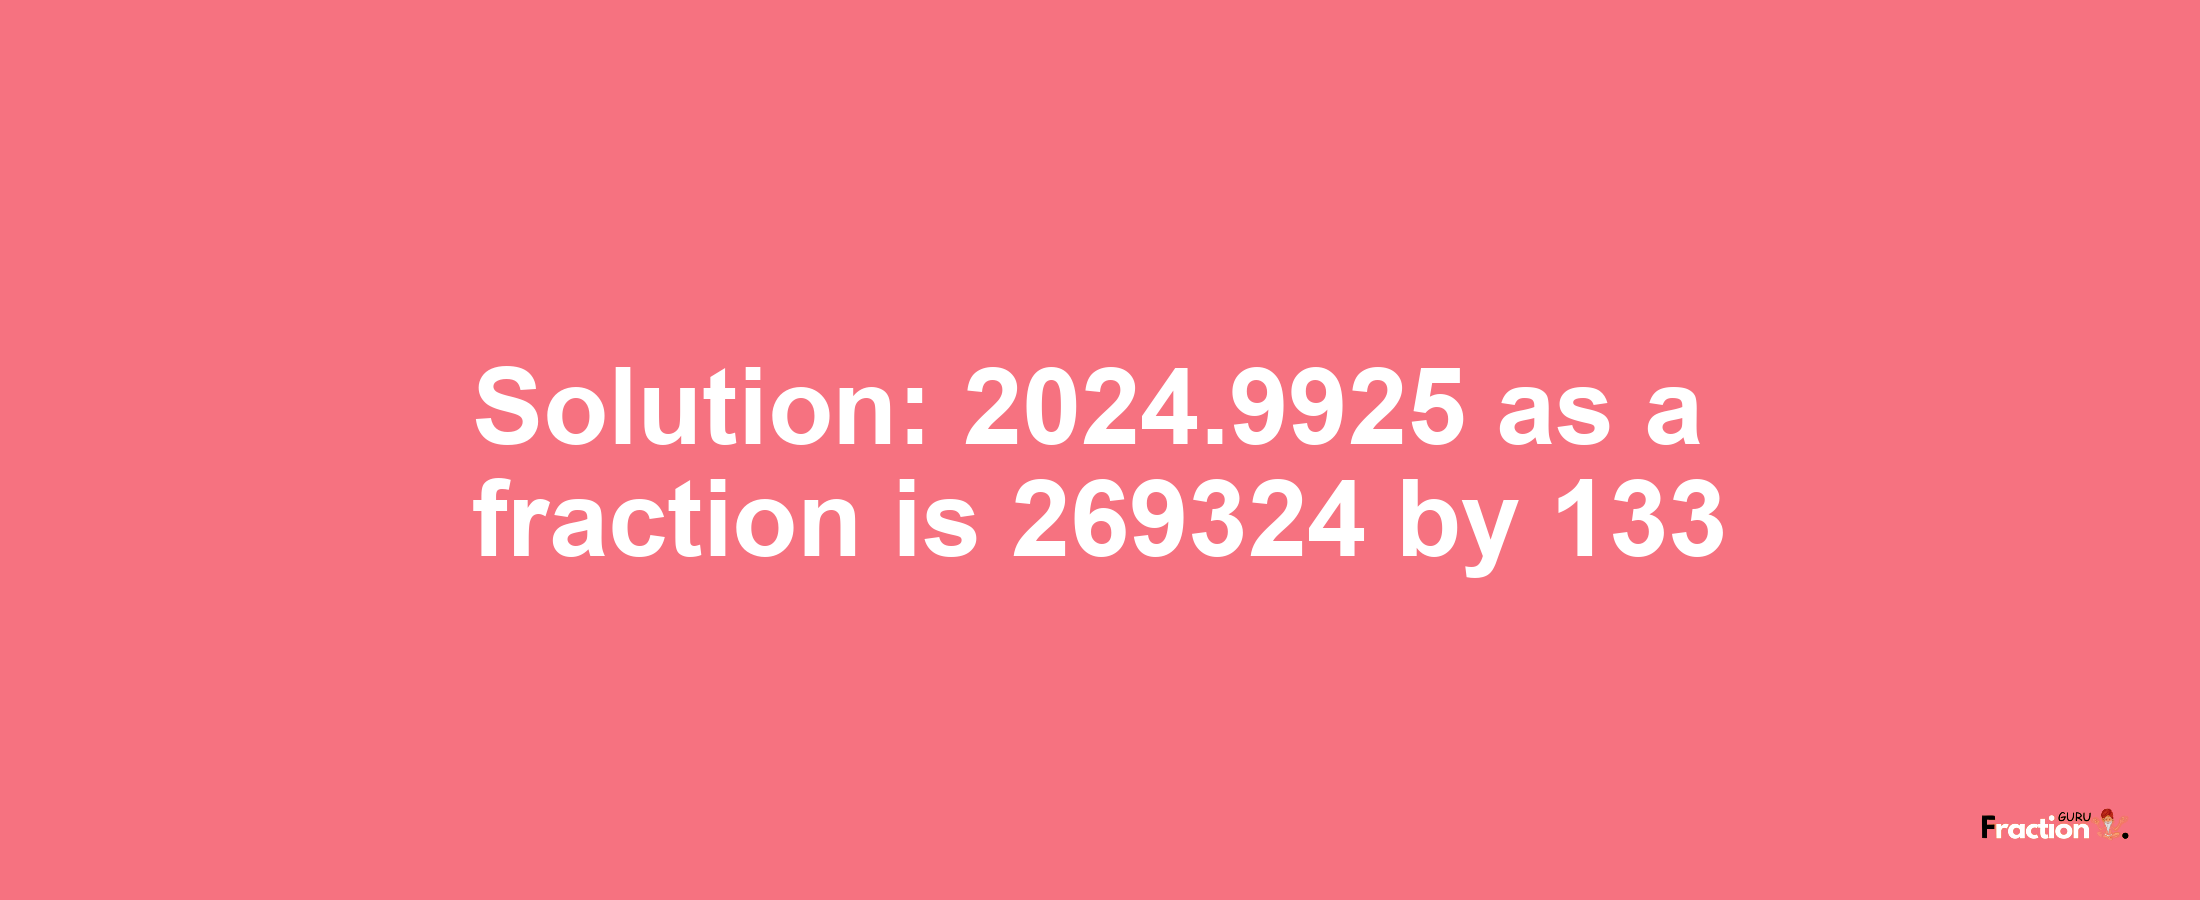 Solution:2024.9925 as a fraction is 269324/133